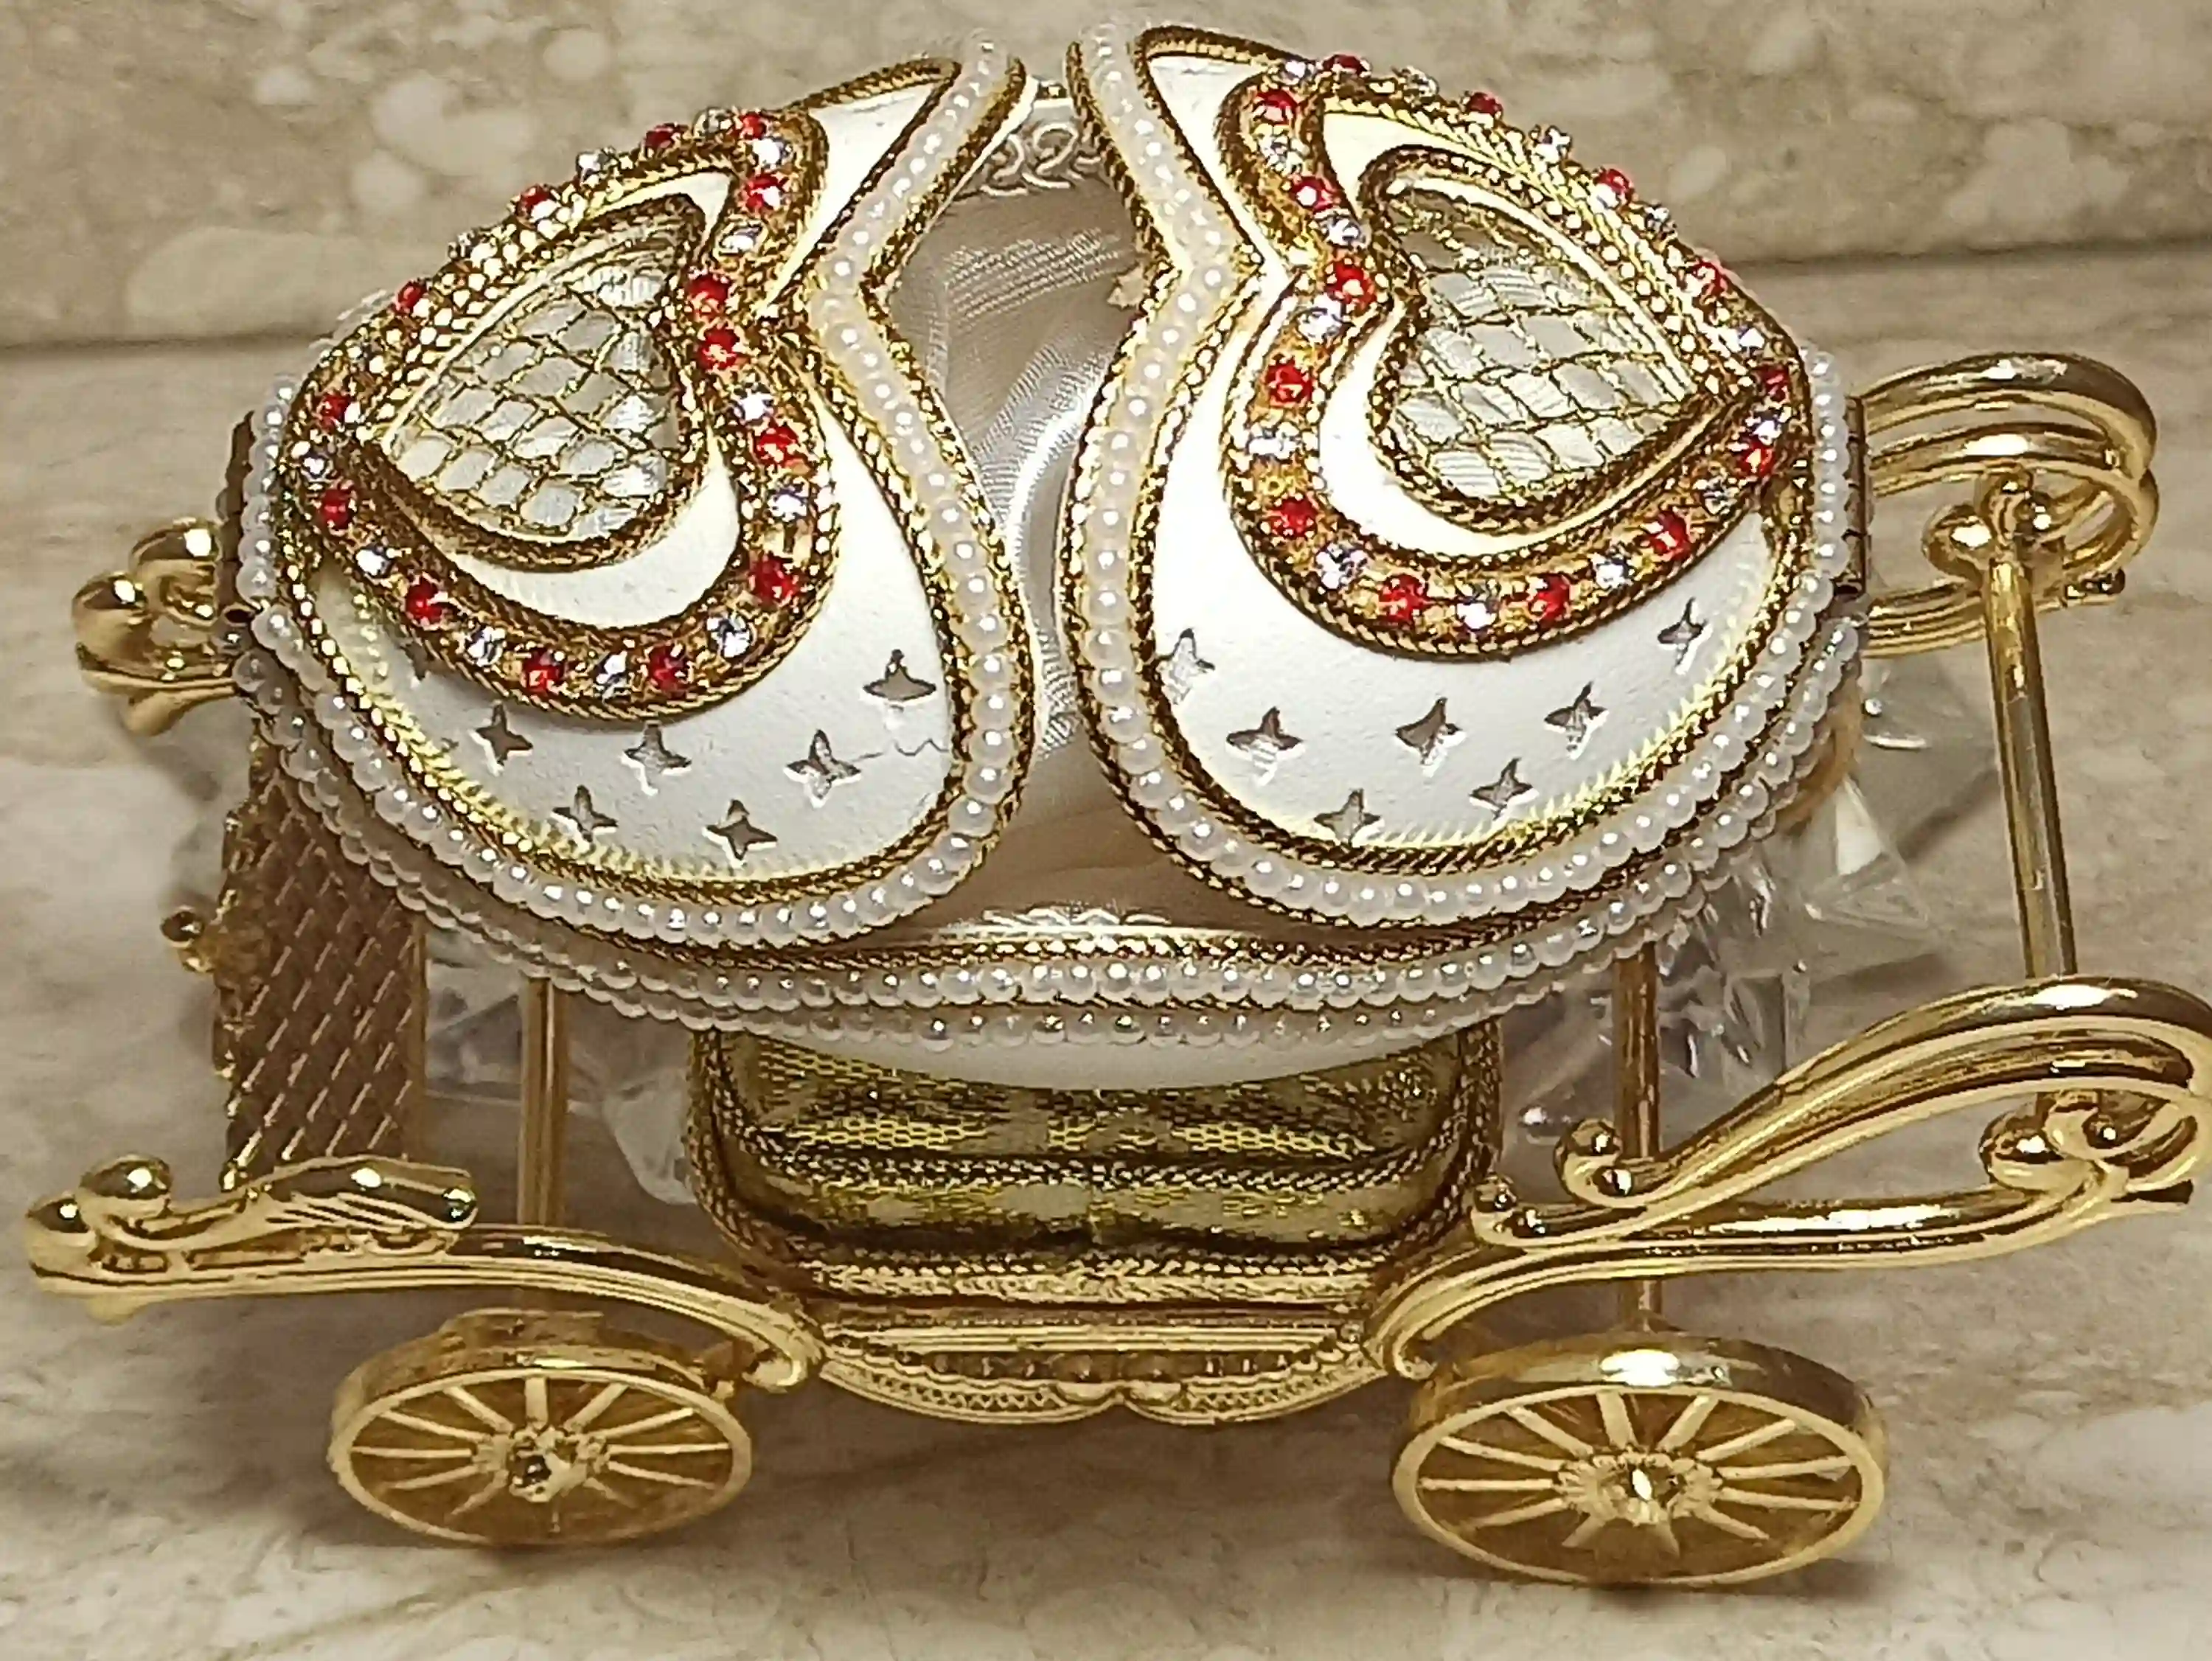 Faberge egg Musical Jewelry Box 24k GOLD REAL Egg HANDCARVED Faberge Egg Gift for mum Unique wedding gift Wife Anniversary Best mom gift 